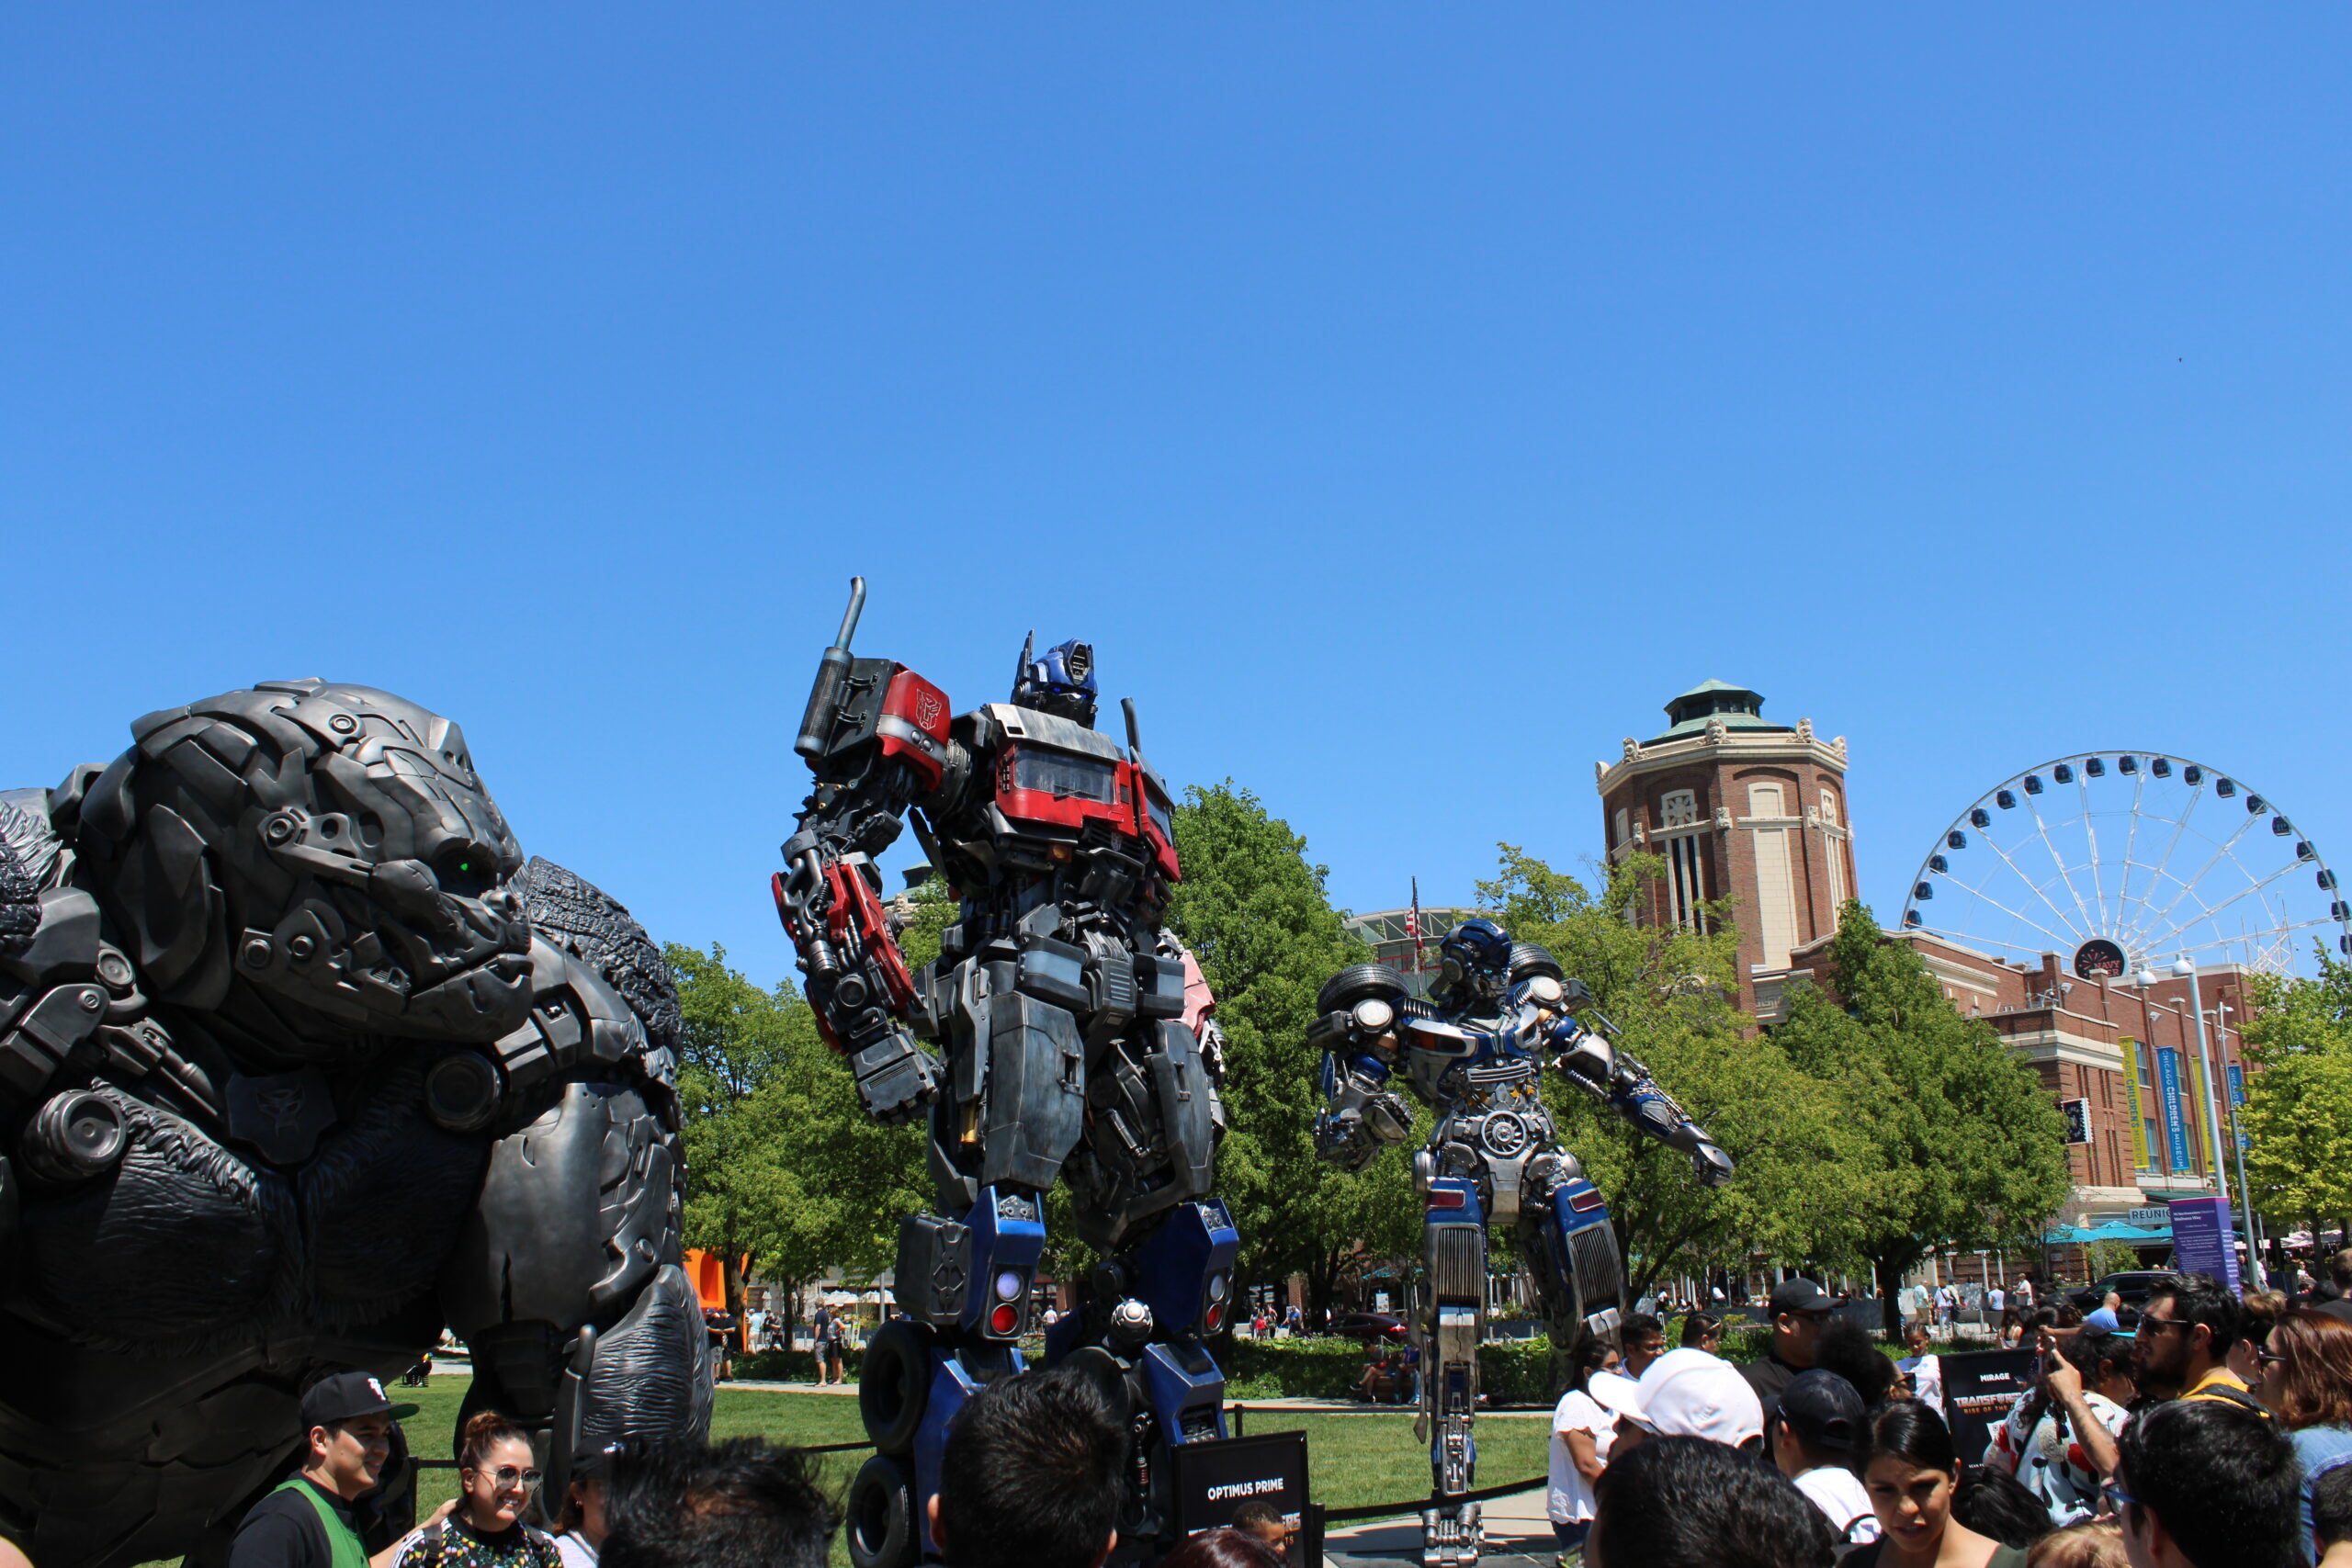 Optimus Primal, Optimus Prime and Mirage, three of the Transformers set up at the entrance to Navy Pier in Chicago.